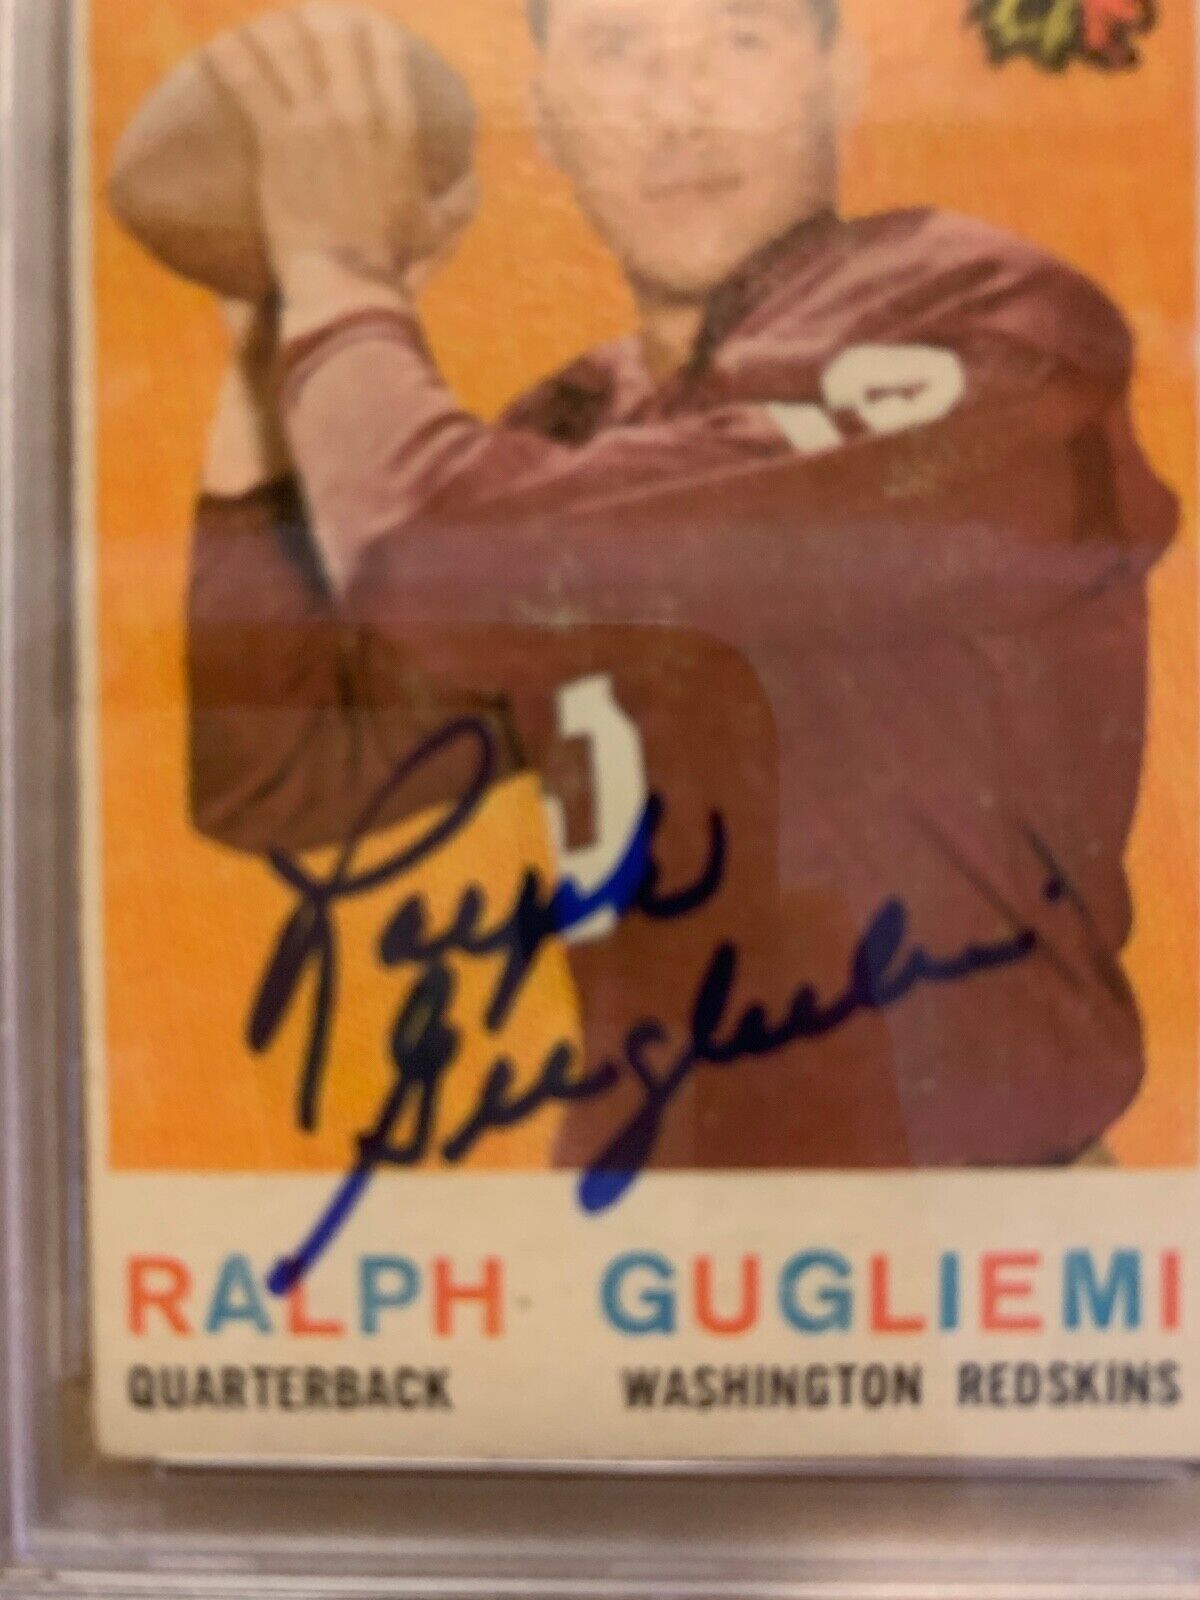 Ralph Gugliemi Redskins Autographed 1959 Topps Card PSA Certified & Slabbed